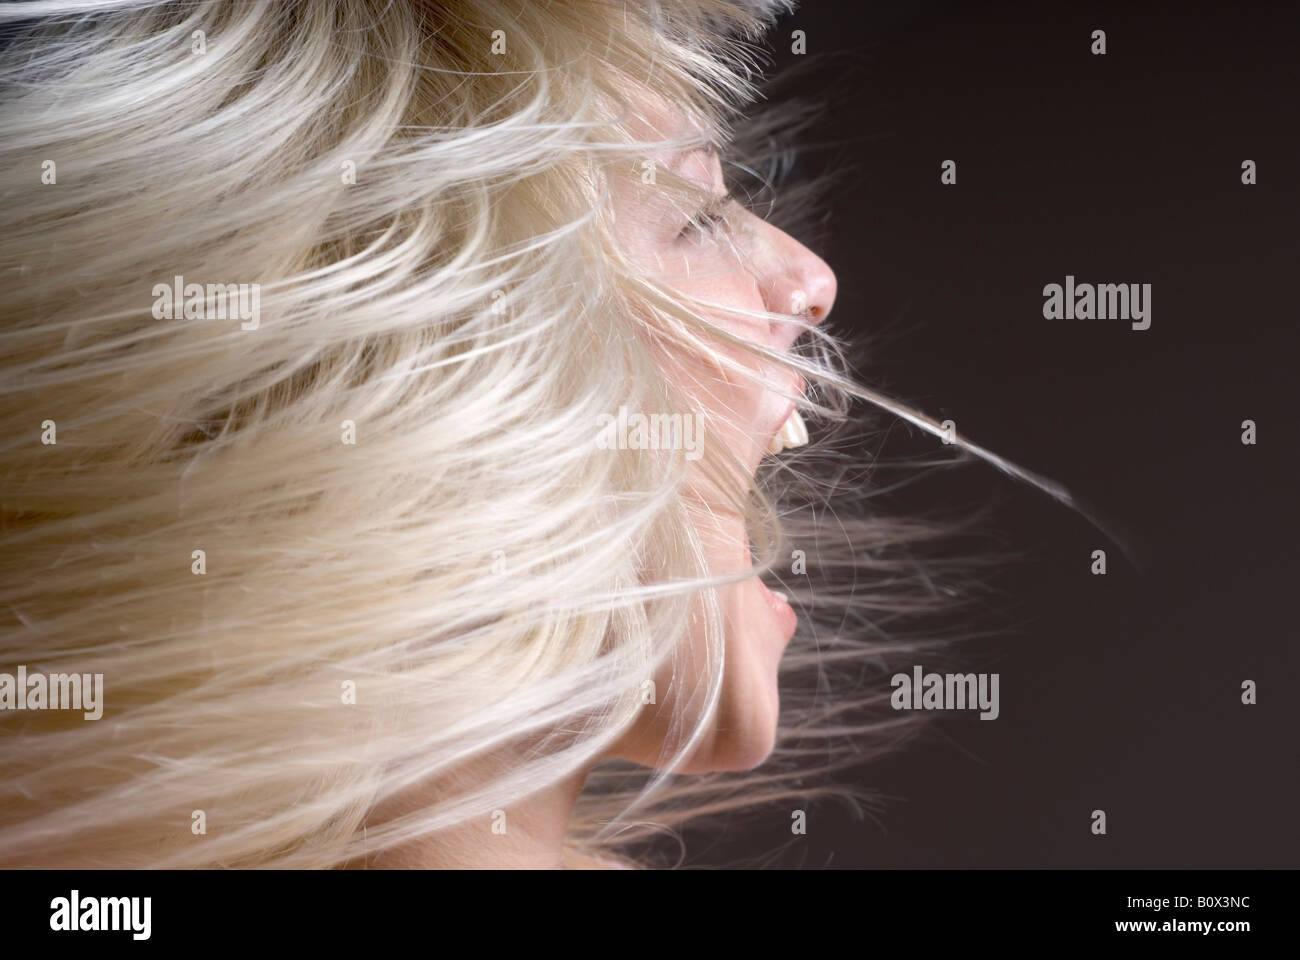 A woman tossing her hair with her mouth open Stock Photo